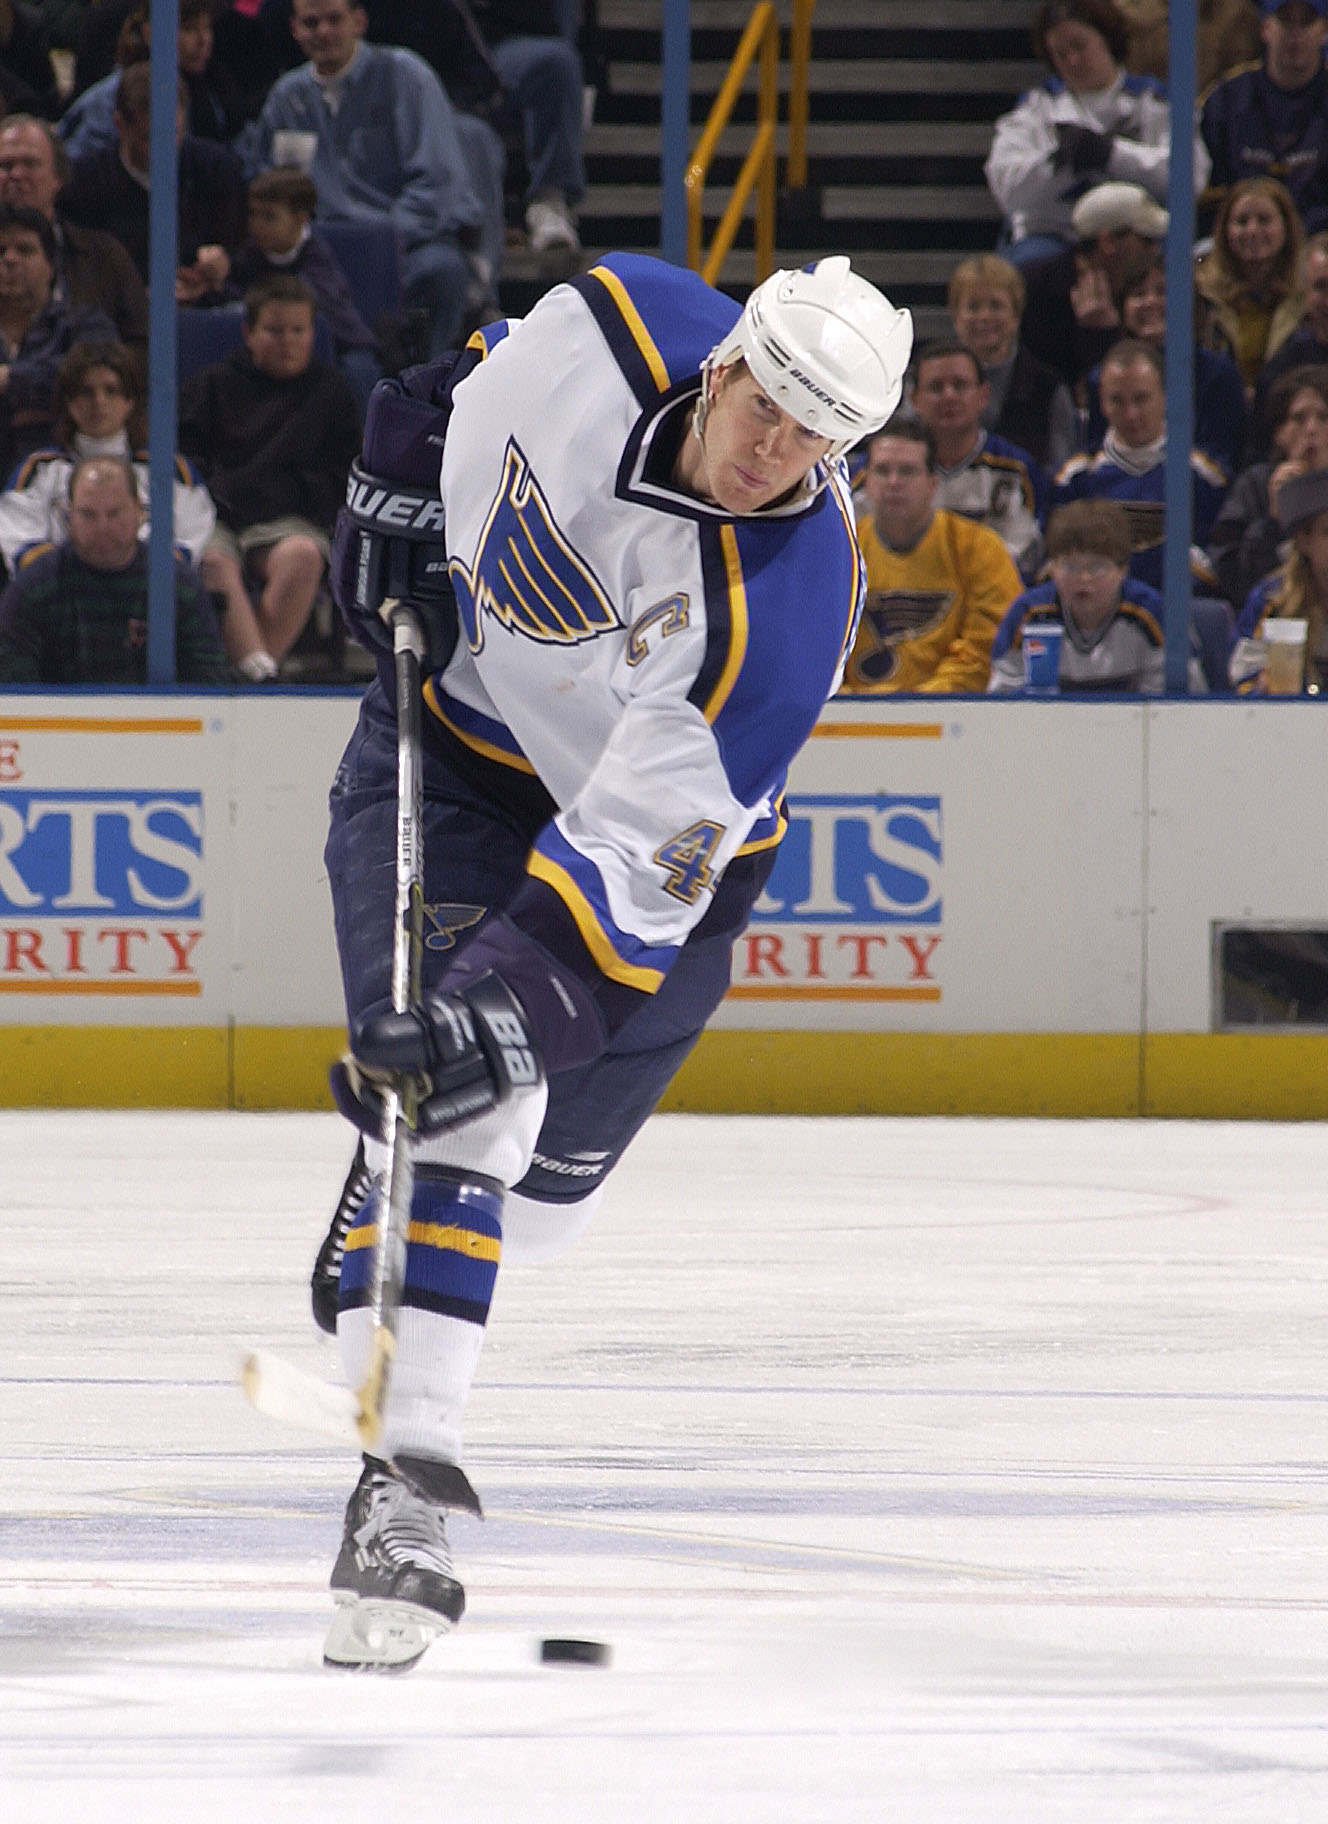 Top 25 Most Influential Players in St. Louis Blues History